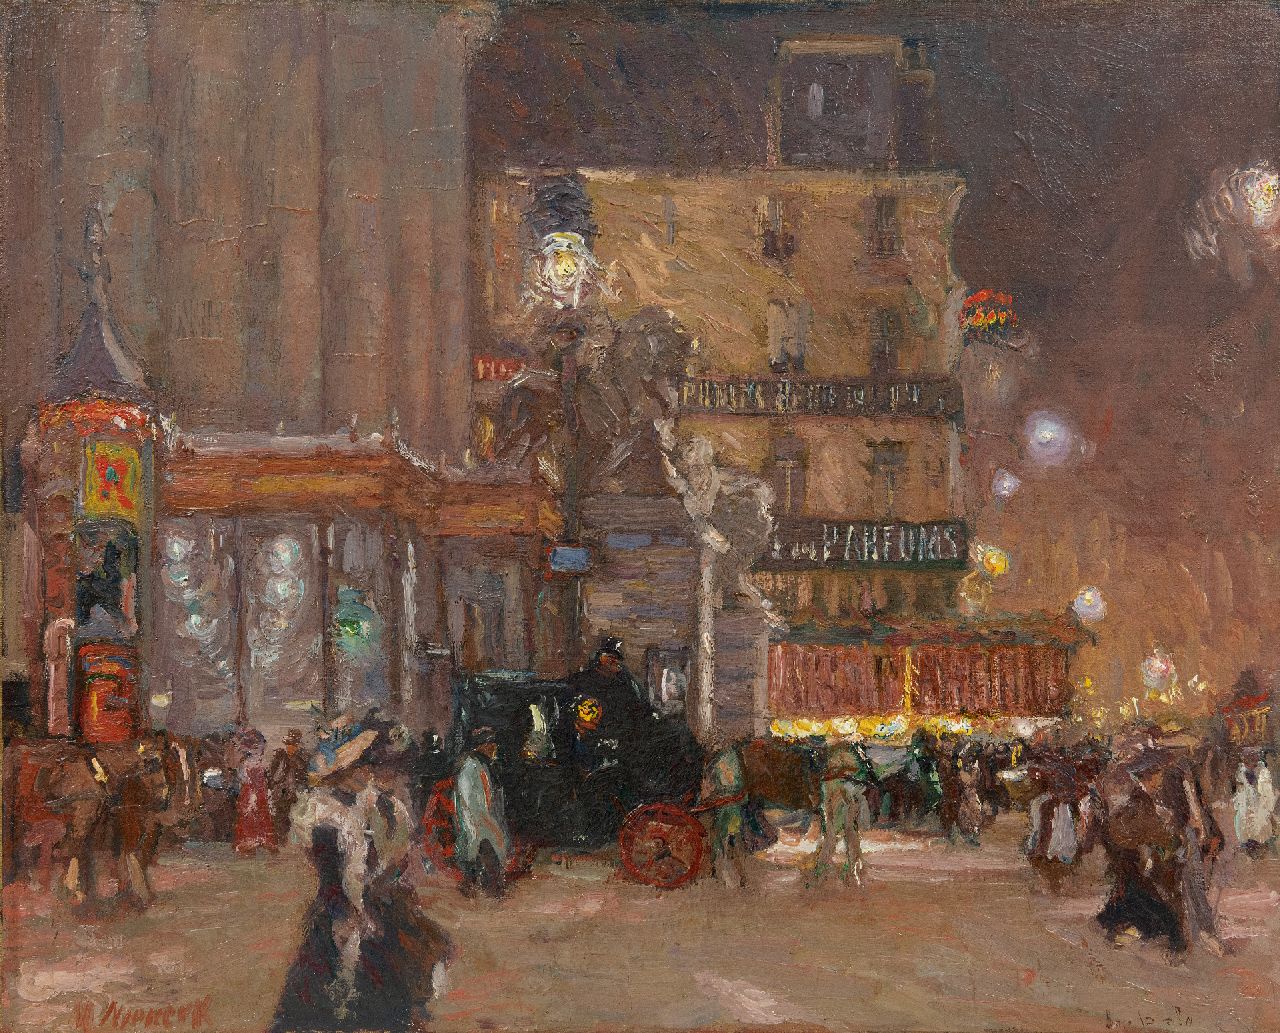 Niekerk M.J.  | 'Maurits' Joseph Niekerk | Paintings offered for sale | A night out in Brussels at the Place de la Bourse, oil on canvas laid down on panel 55.9 x 70.0 cm, signed l.l. and painted ca. 1903-1908